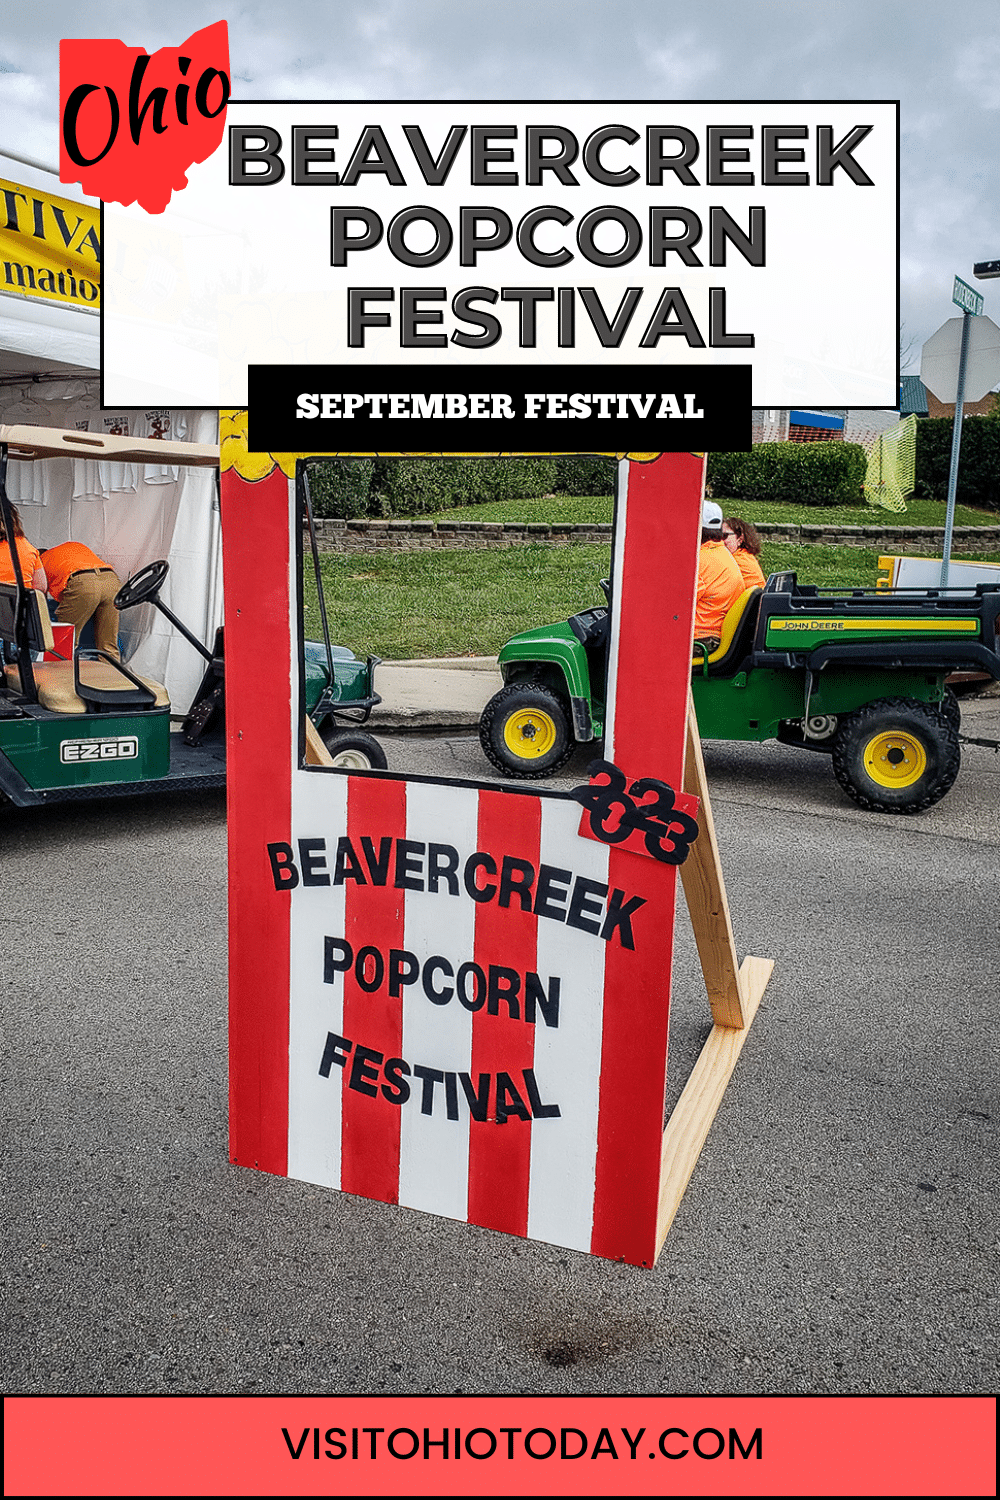 The Beavercreek Popcorn Festival is held on the weekend after Labor Day in Beavercreek. It’s all about the popcorn! But there are also a lot of other great activities and events for all the family throughout this two-day festival.